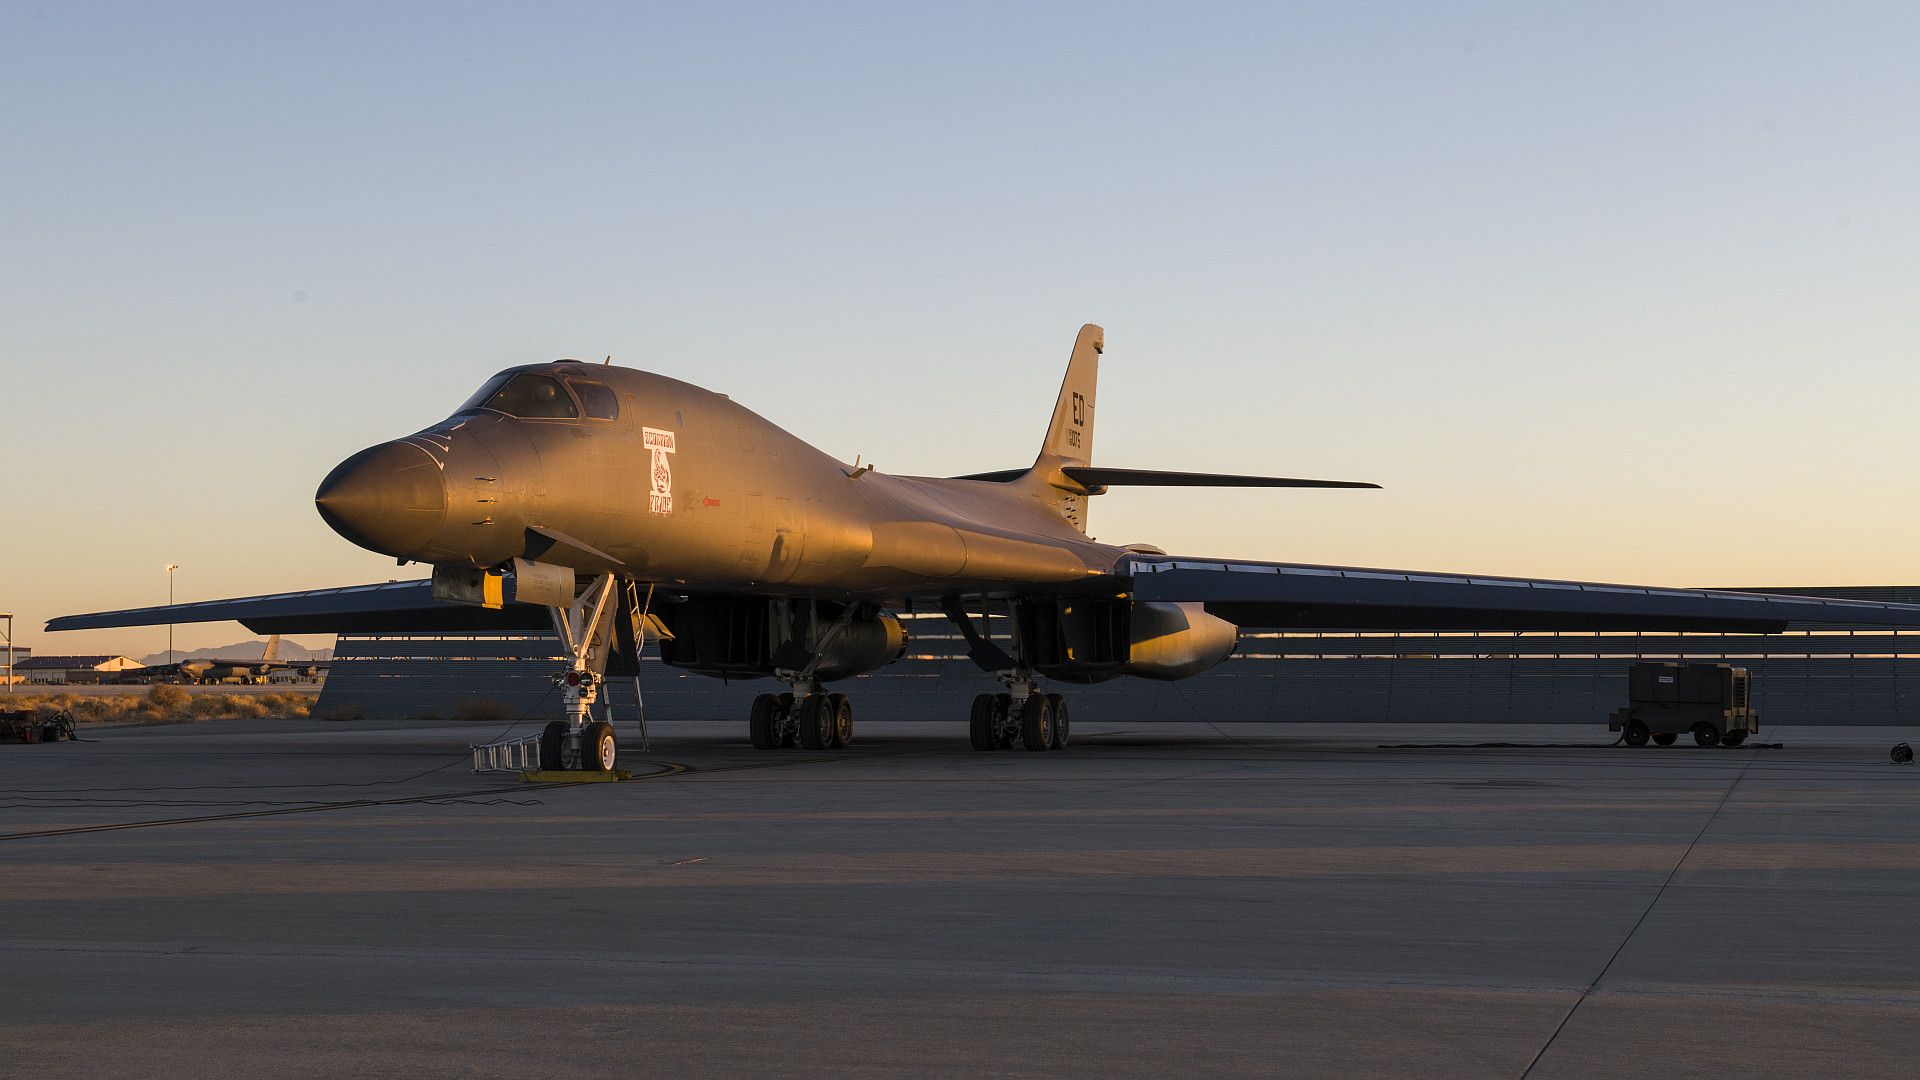 B 1B Lancer Assigned To The 419th Flight Test Squadron 412th Test Wing Prepares For An External Release Demonstration